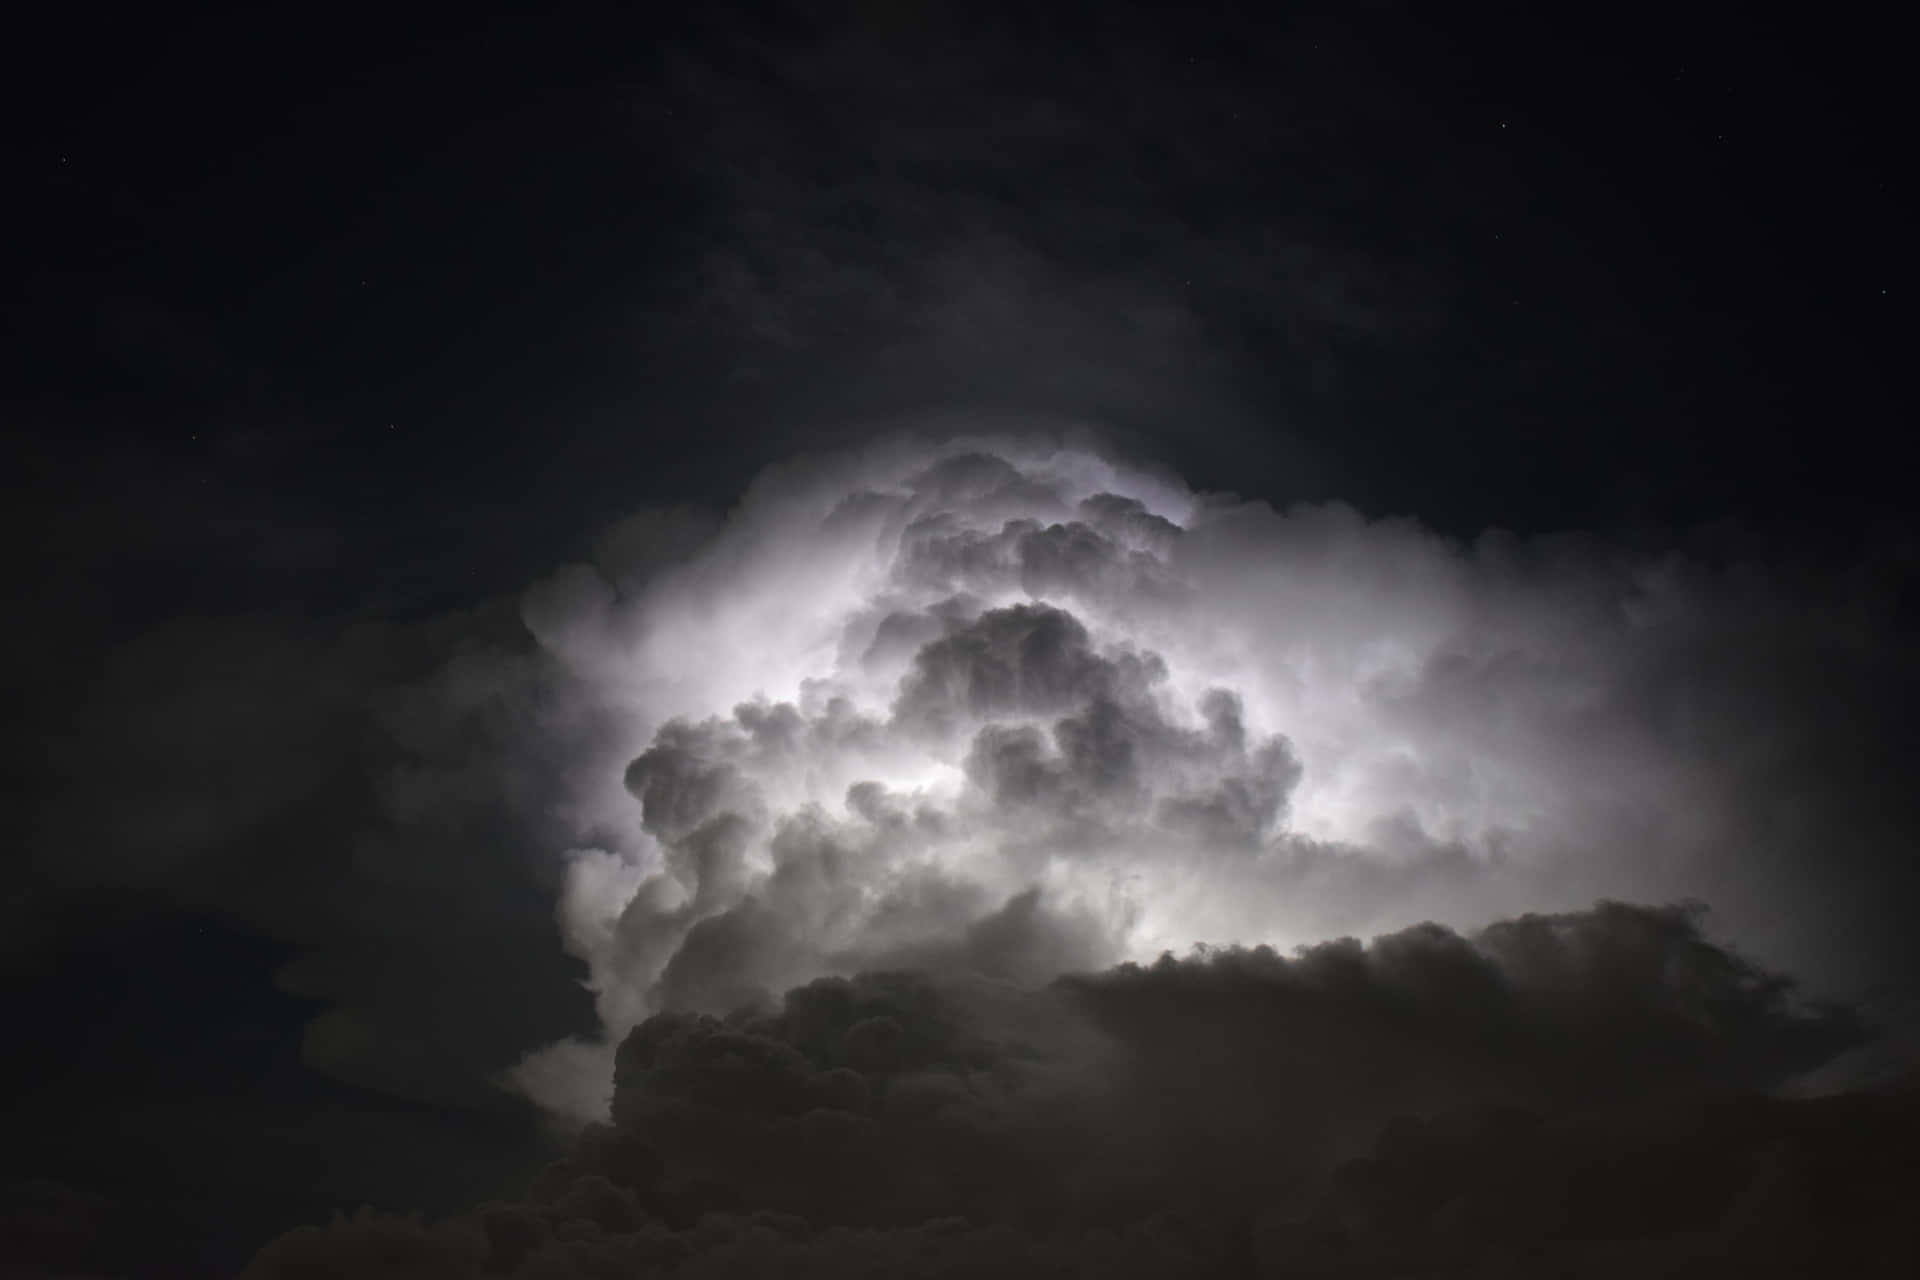 A Large Cloud Is Seen In The Sky At Night